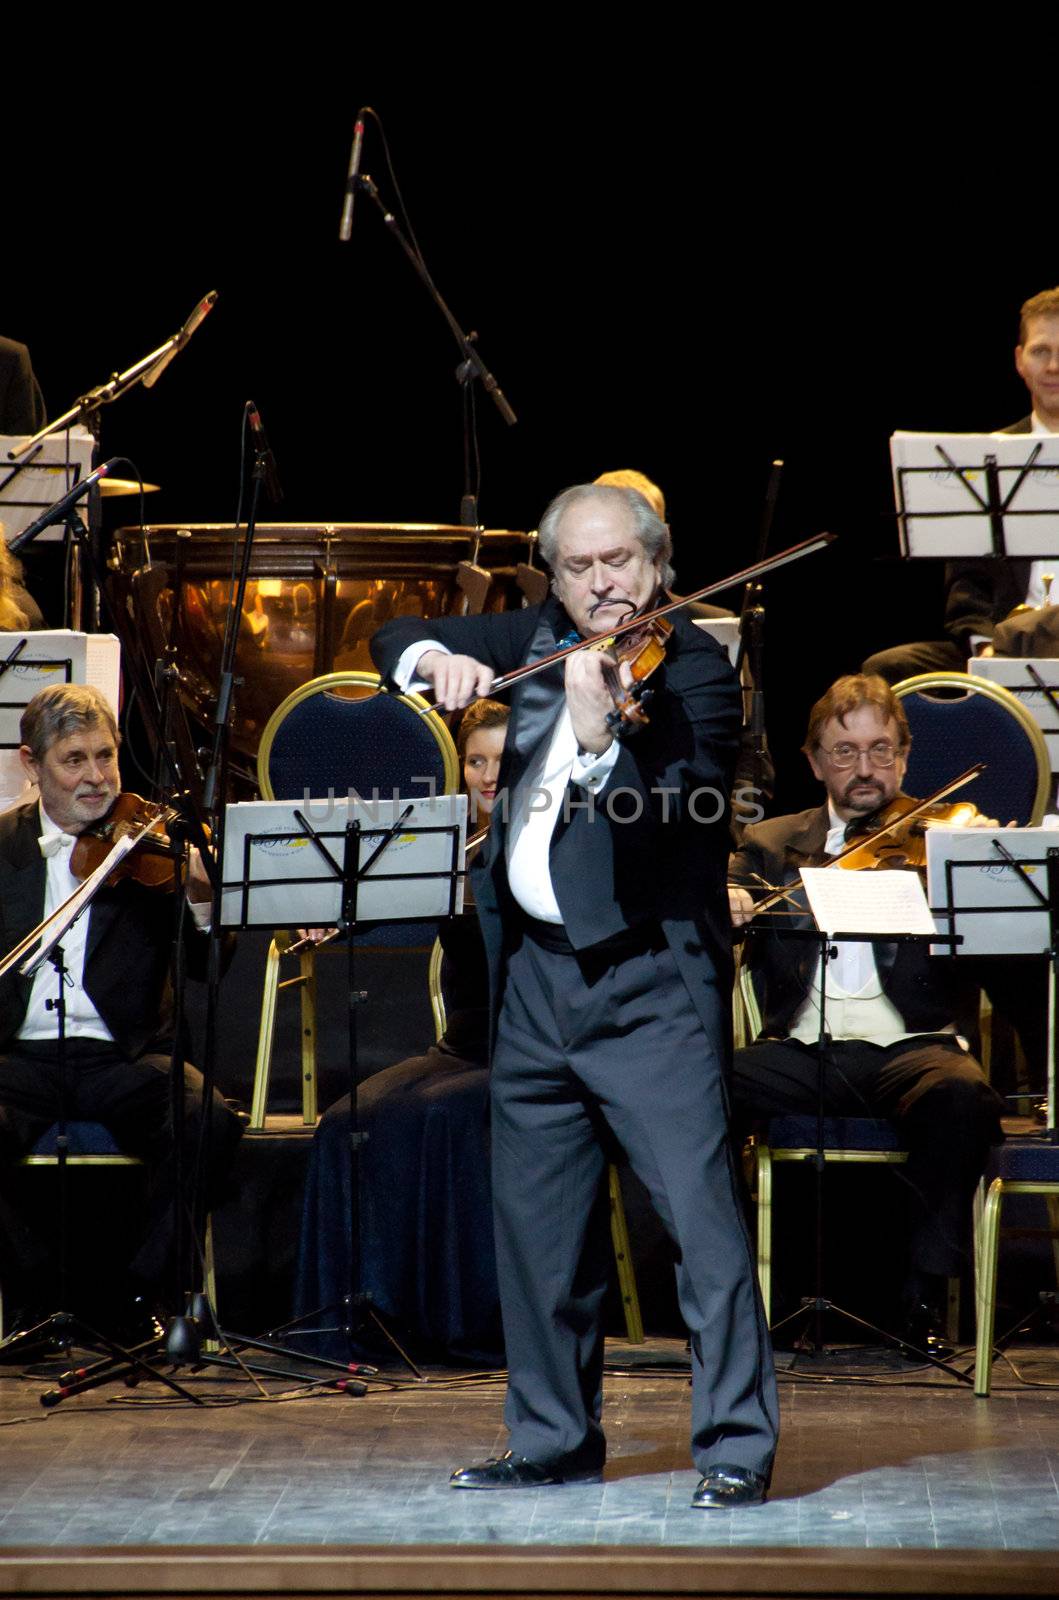 Peter Guth and Strauss Festival Orchestra Vienna in concert Crocus City Hall. 
Moscow - November 17, 2010